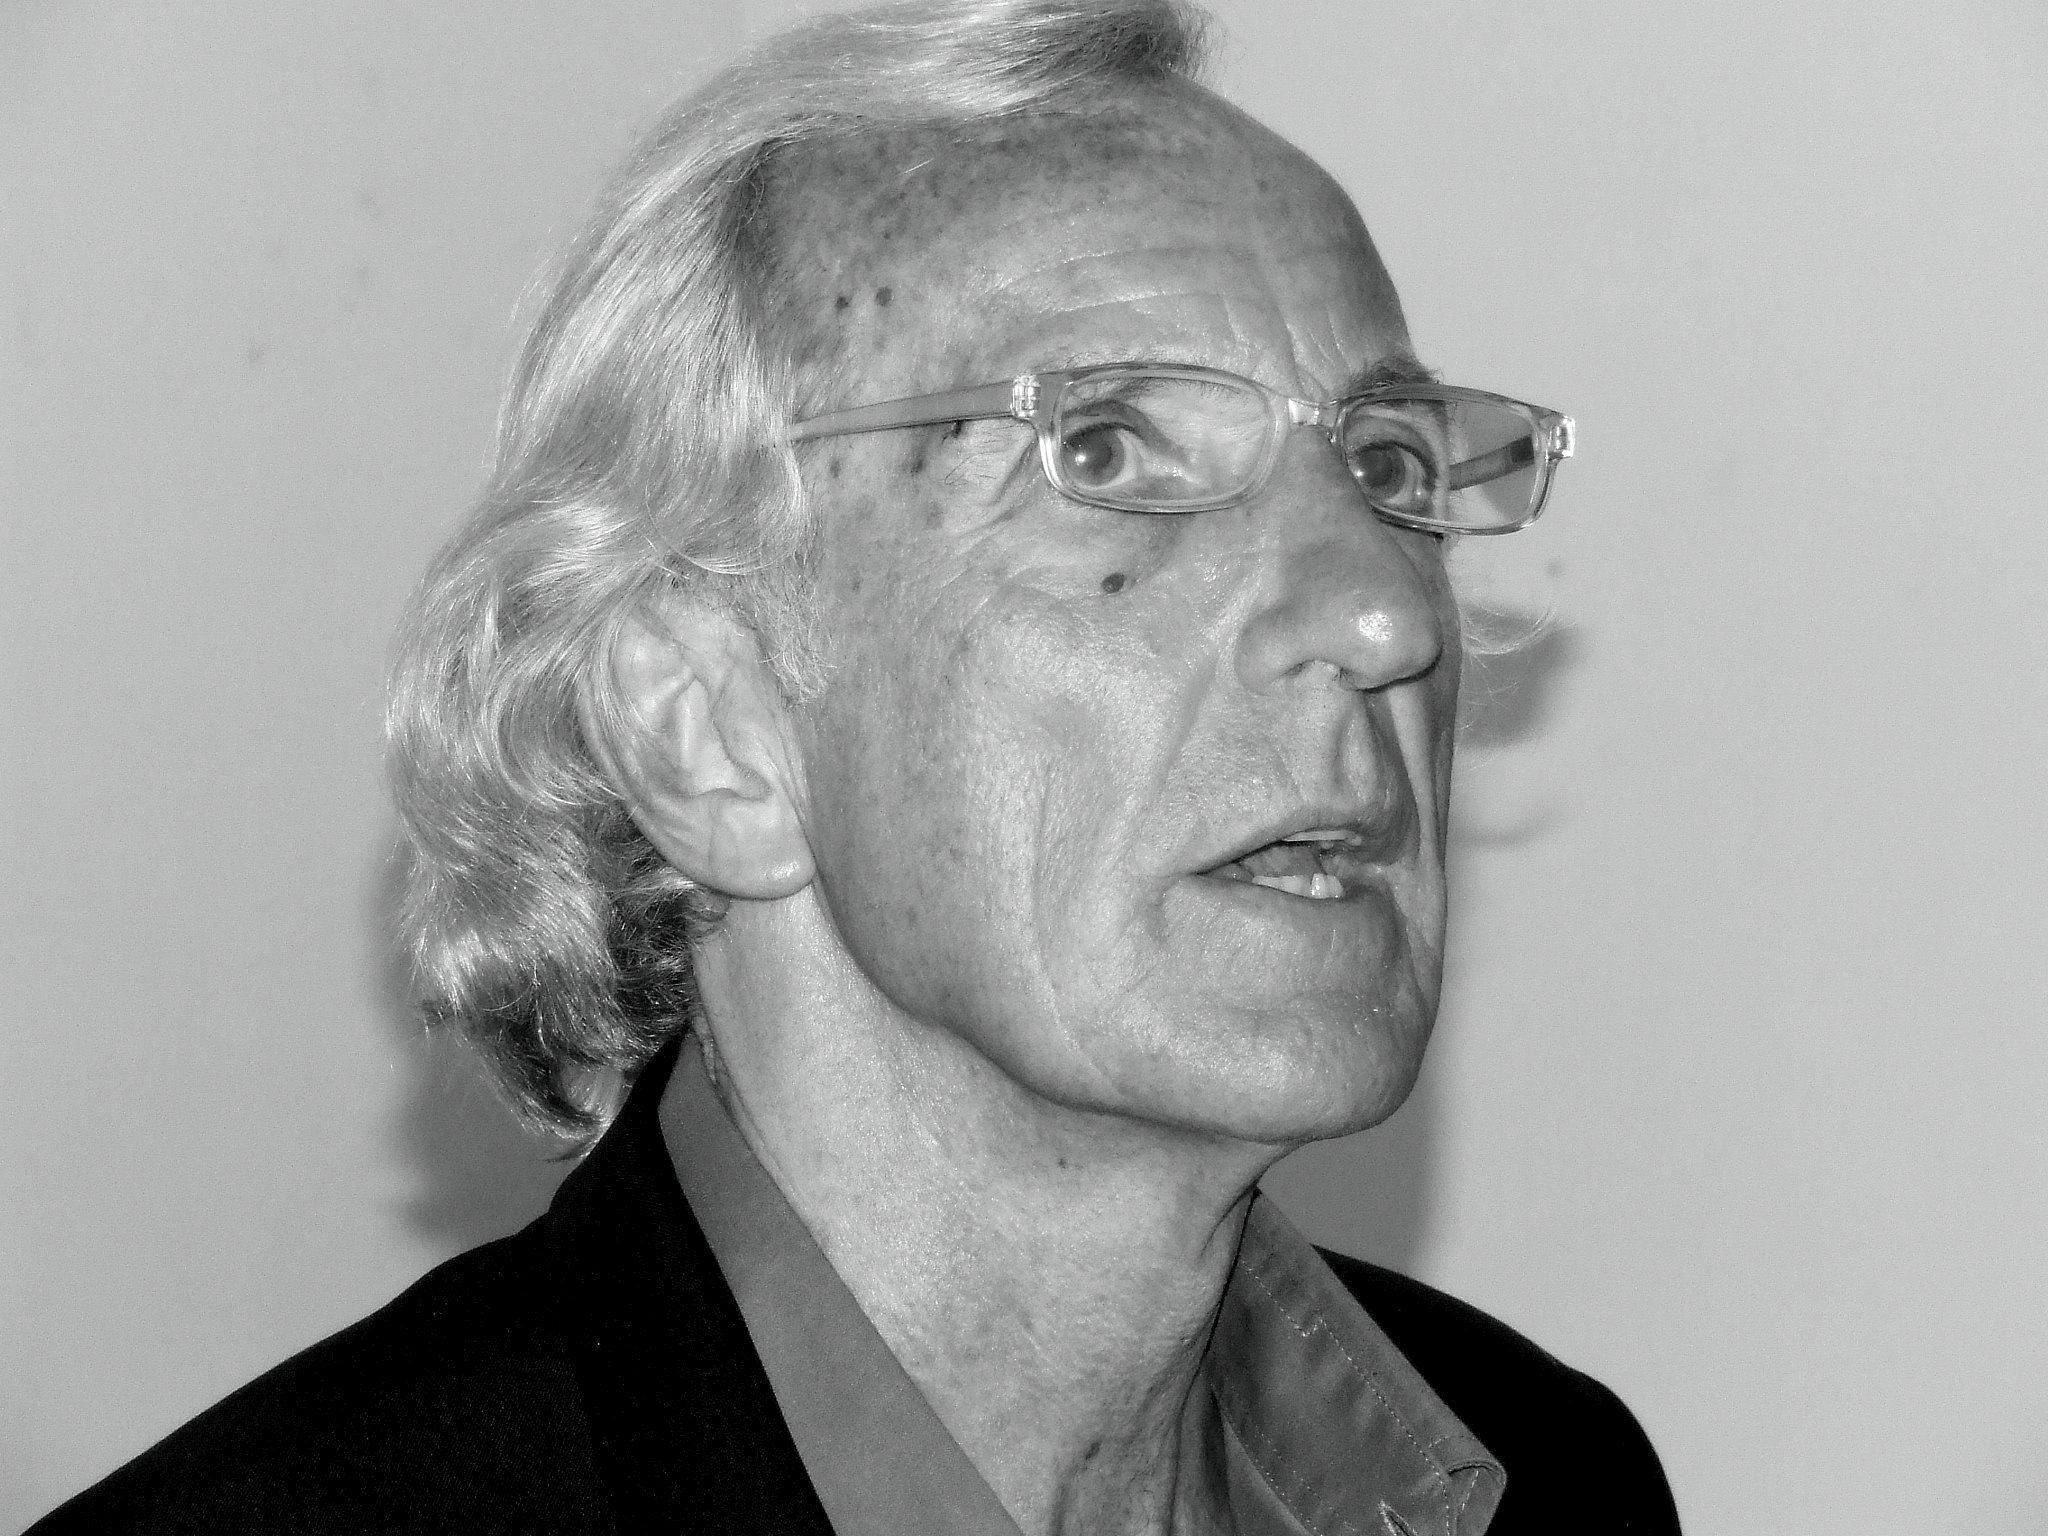 John Pilger at Humber Mouth Festival 2006 (a literary festival in Hull, England, that started in 1992). Taken on June 20, 2006 by walnut whippet. (CC BY 2.0).